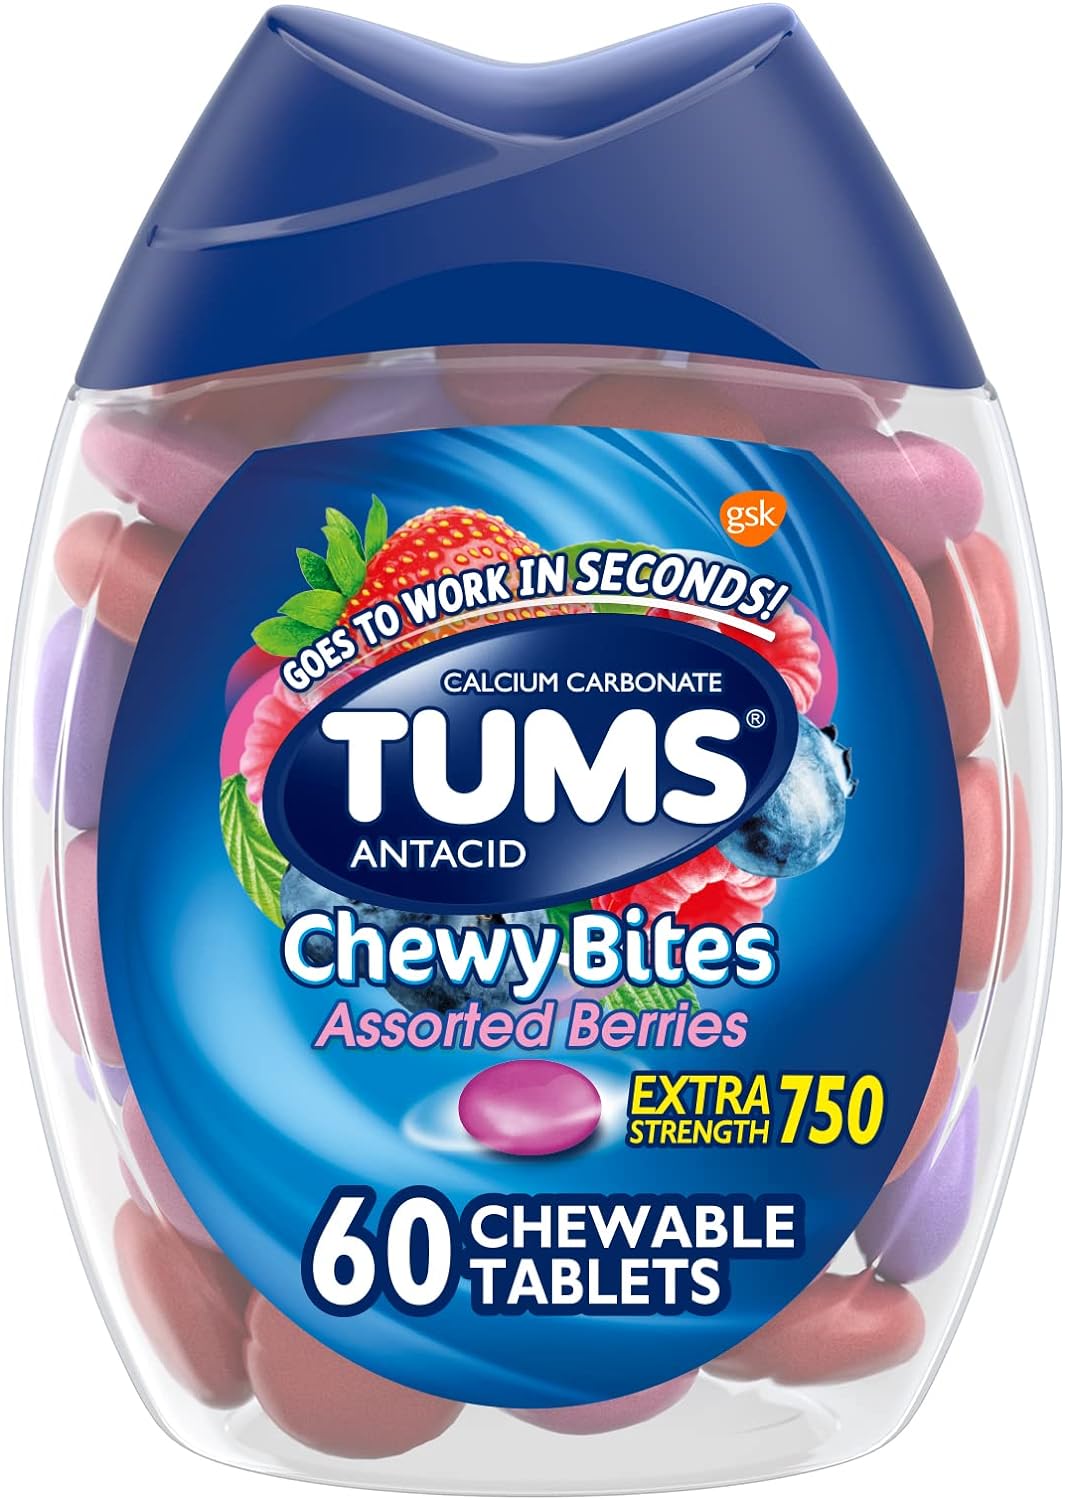 What are Antacids? Is Tums an Antacid?